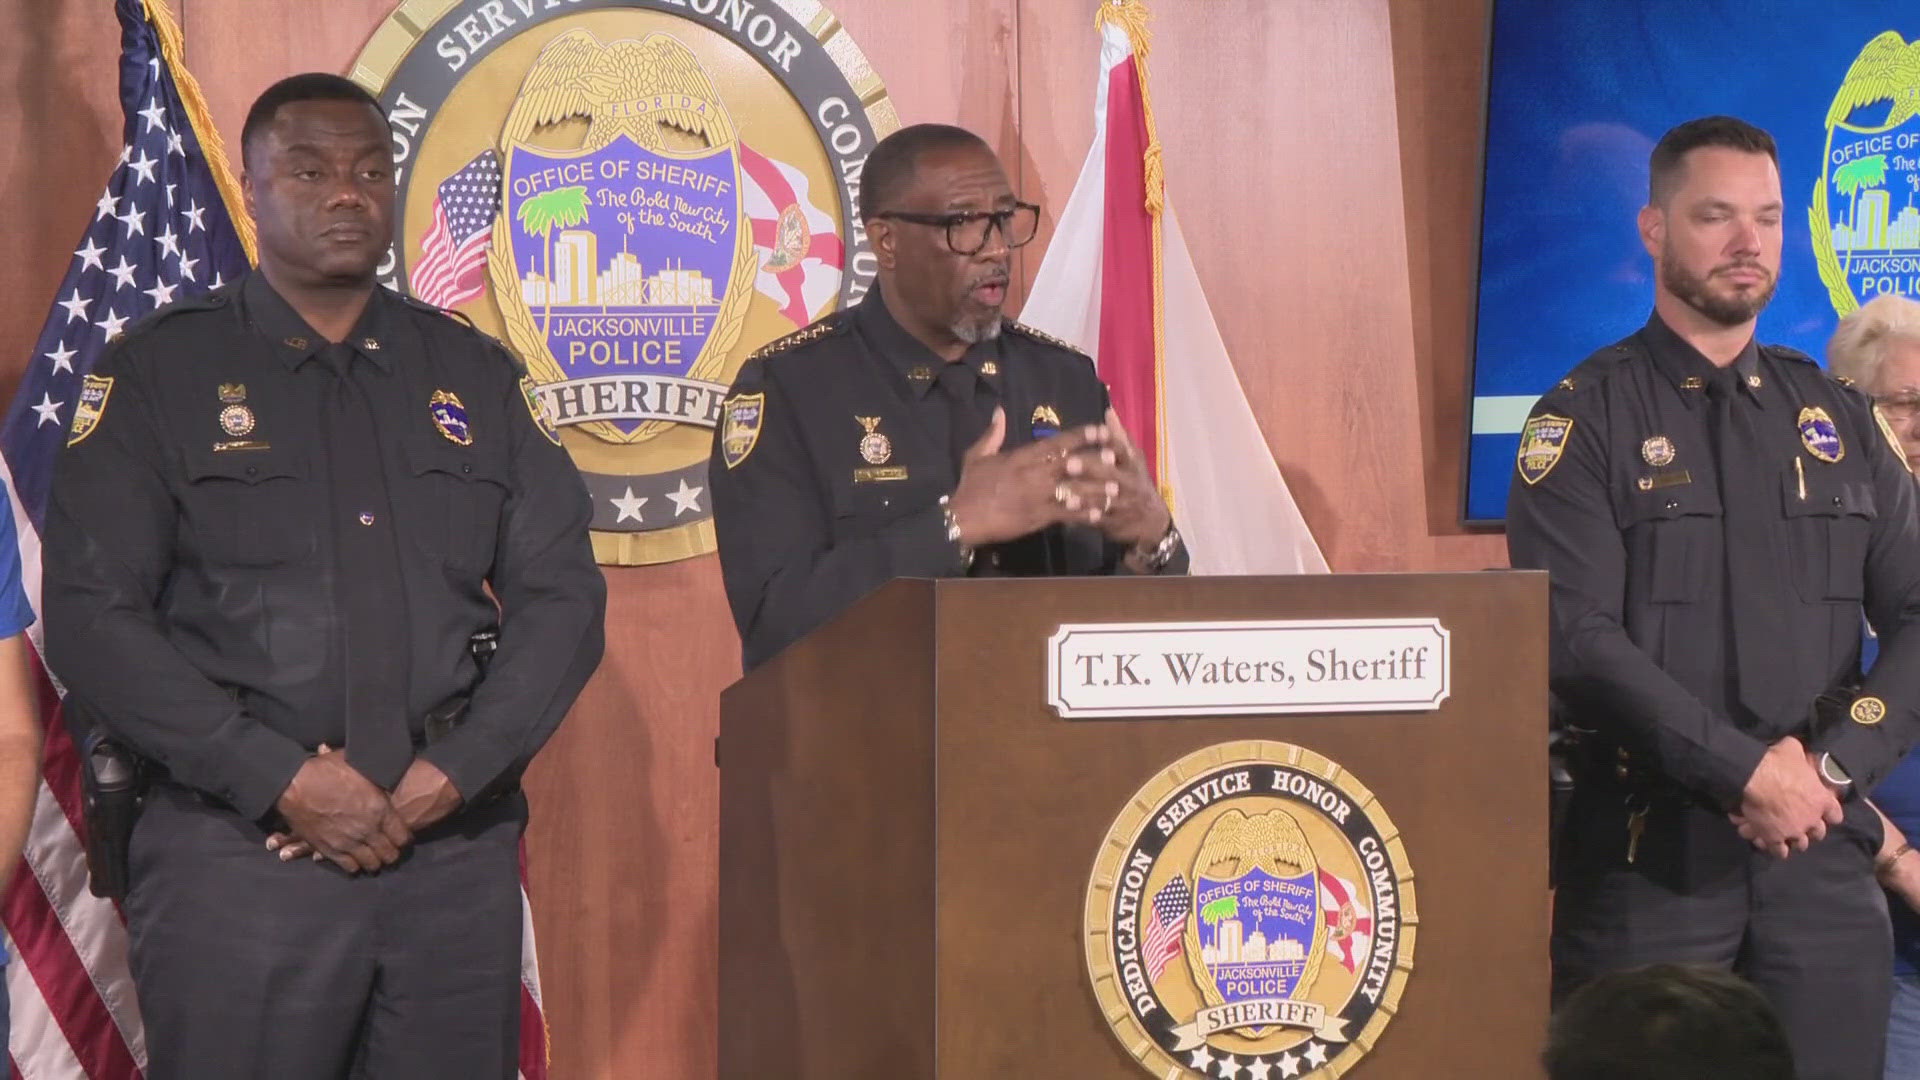 Jacksonville Sheriff T.K. Waters says the drug investigation began after a citizen reported "narcotics activity" concerns at a Sheriff's Watch meeting in February.